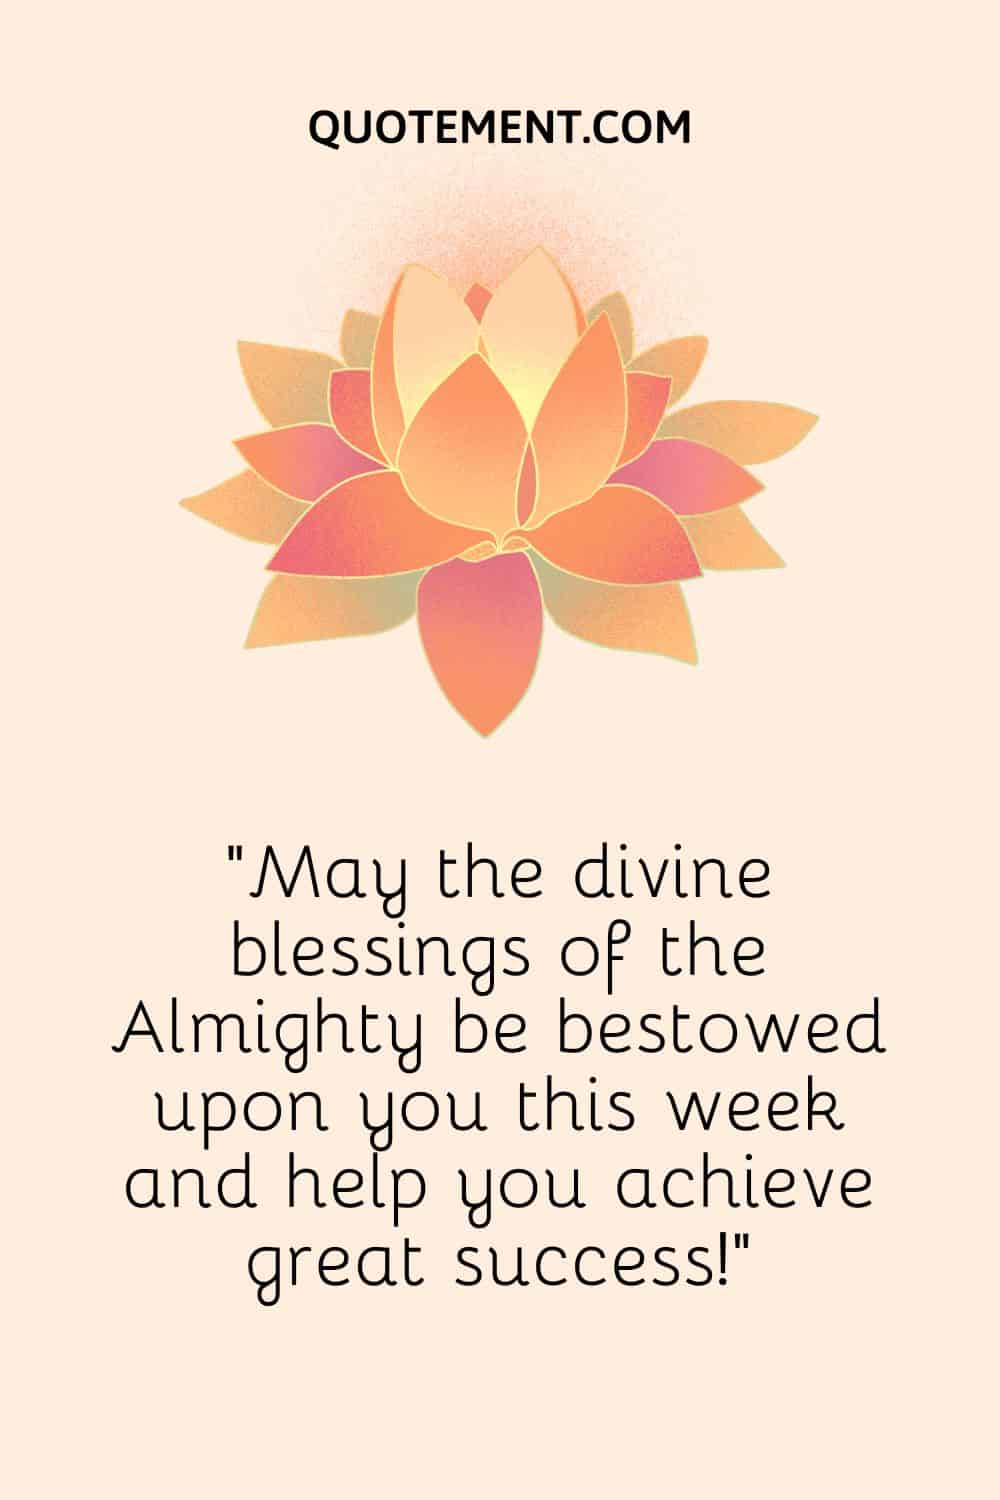 May the divine blessings of the Almighty be bestowed upon you